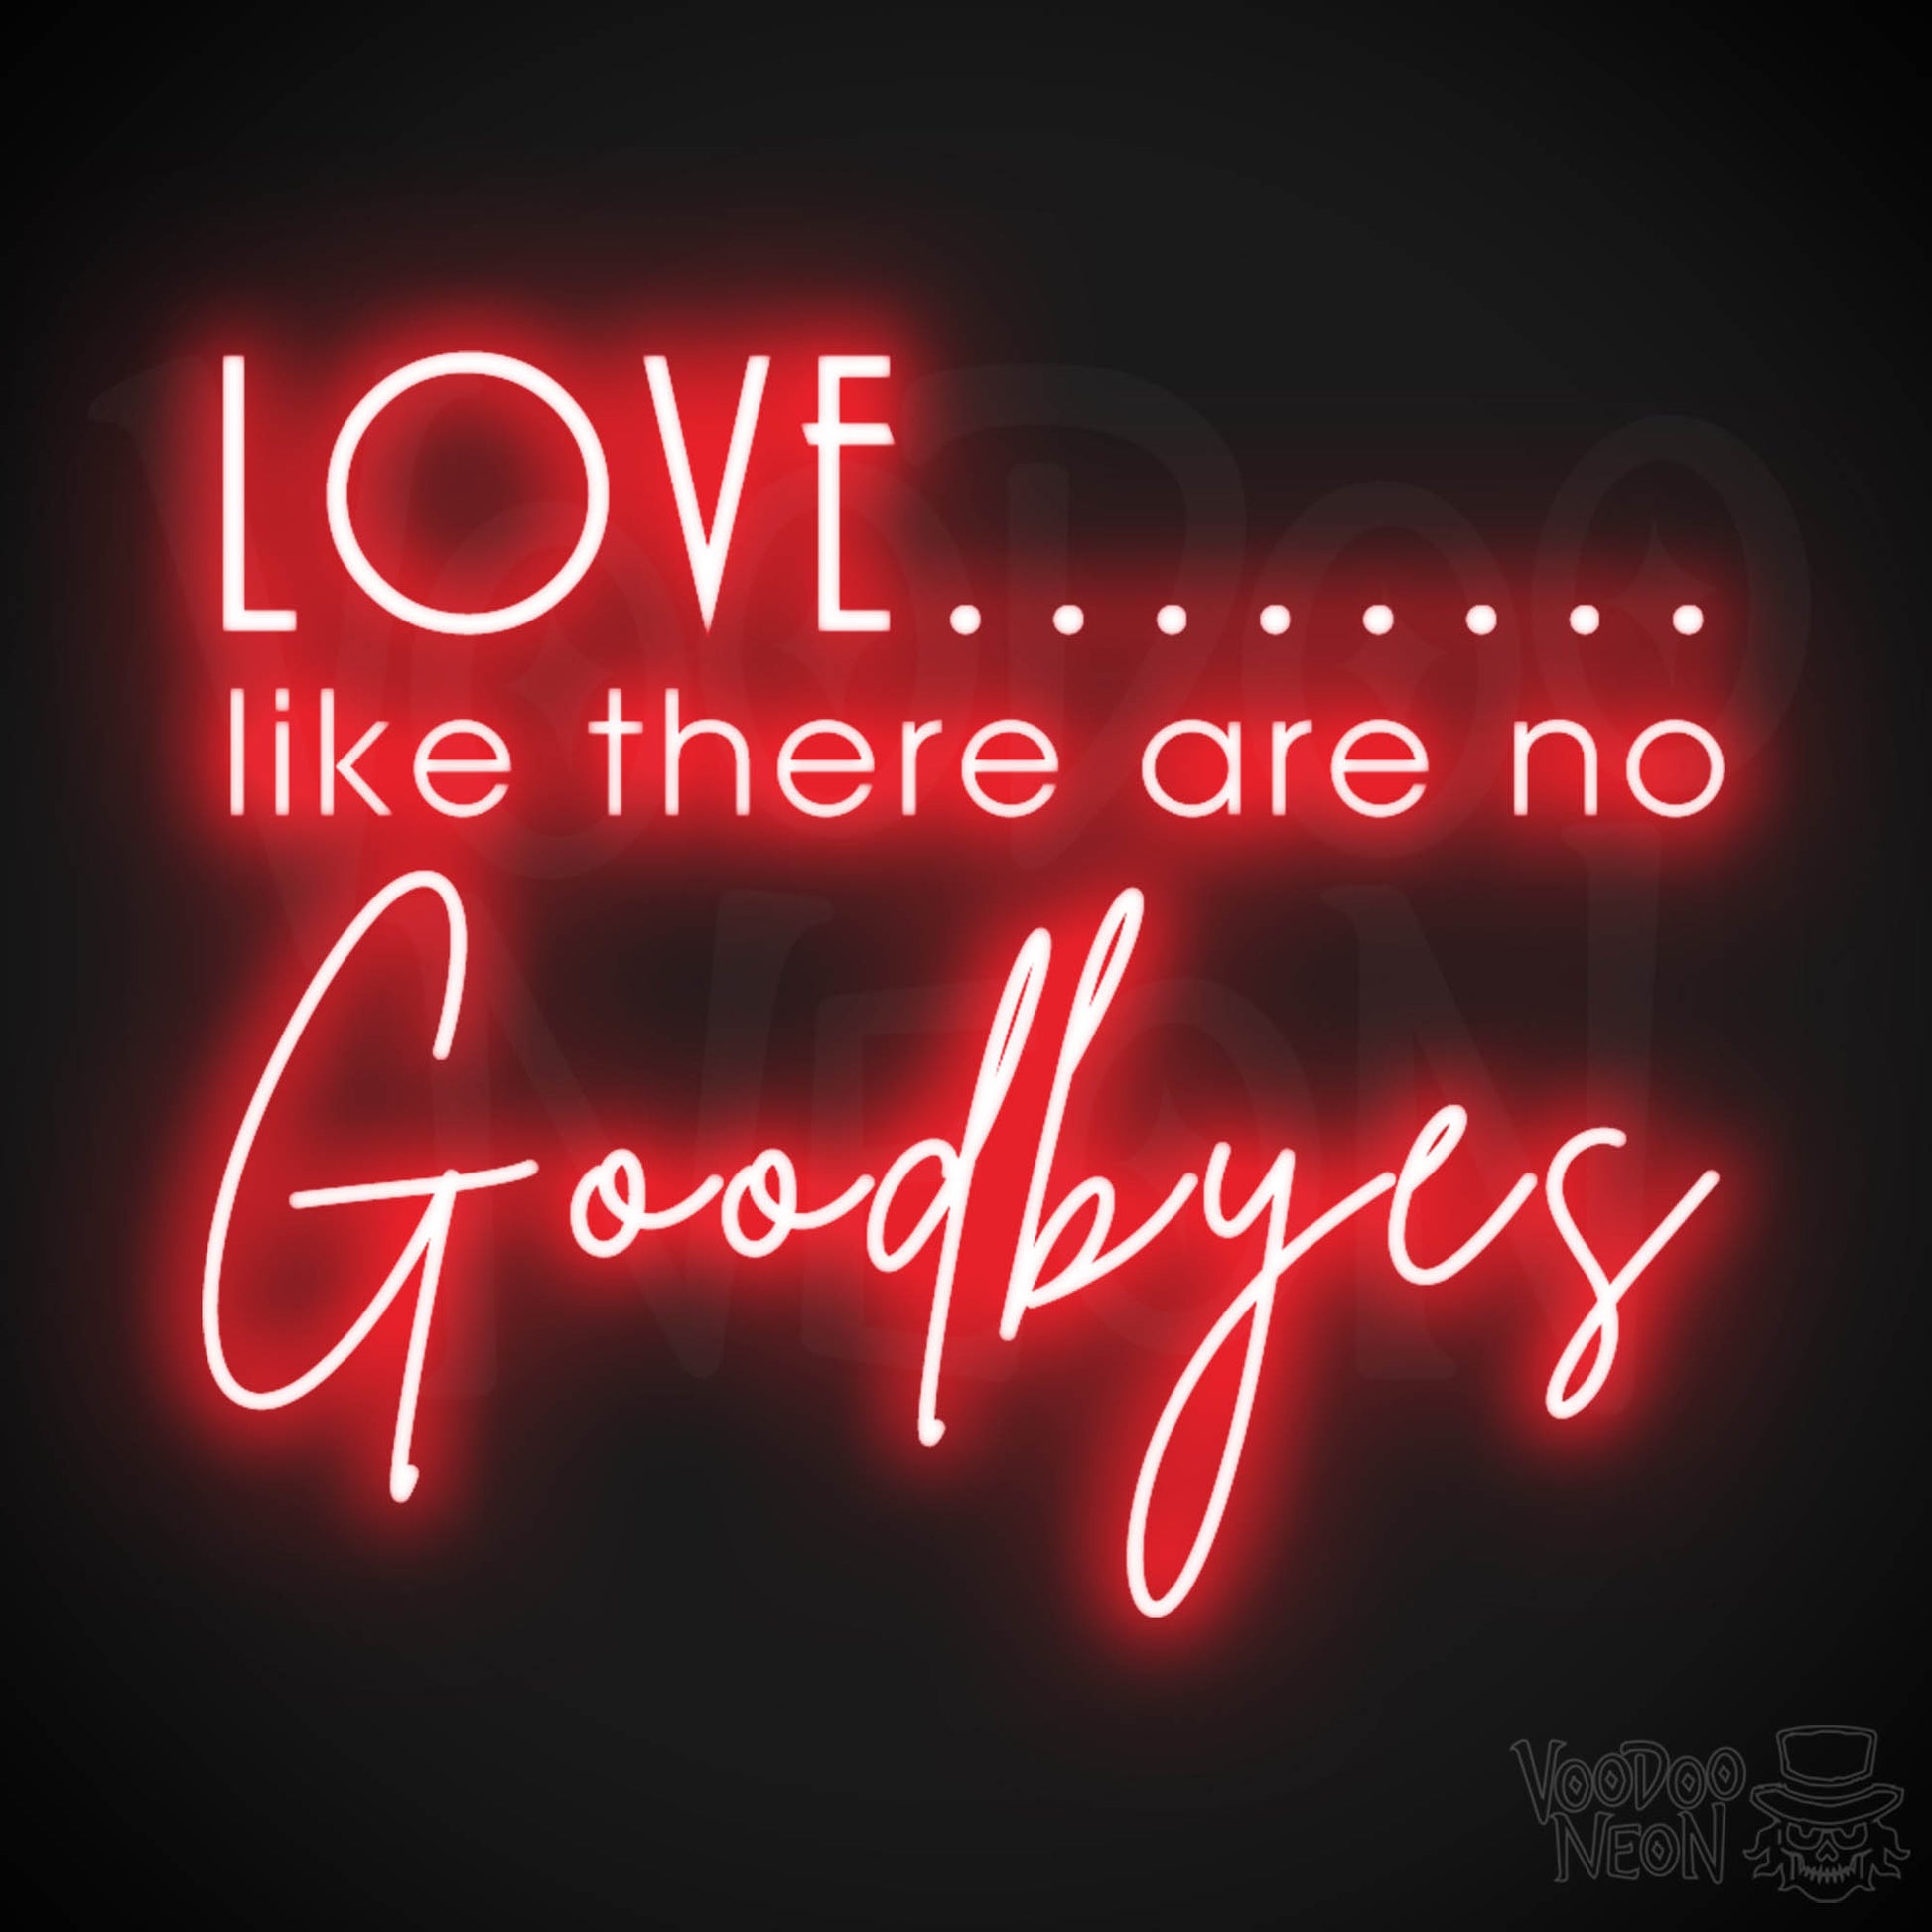 Love Like There Are No Goodbyes Sign - Neon Sign & Wedding Wall Art - Color Red